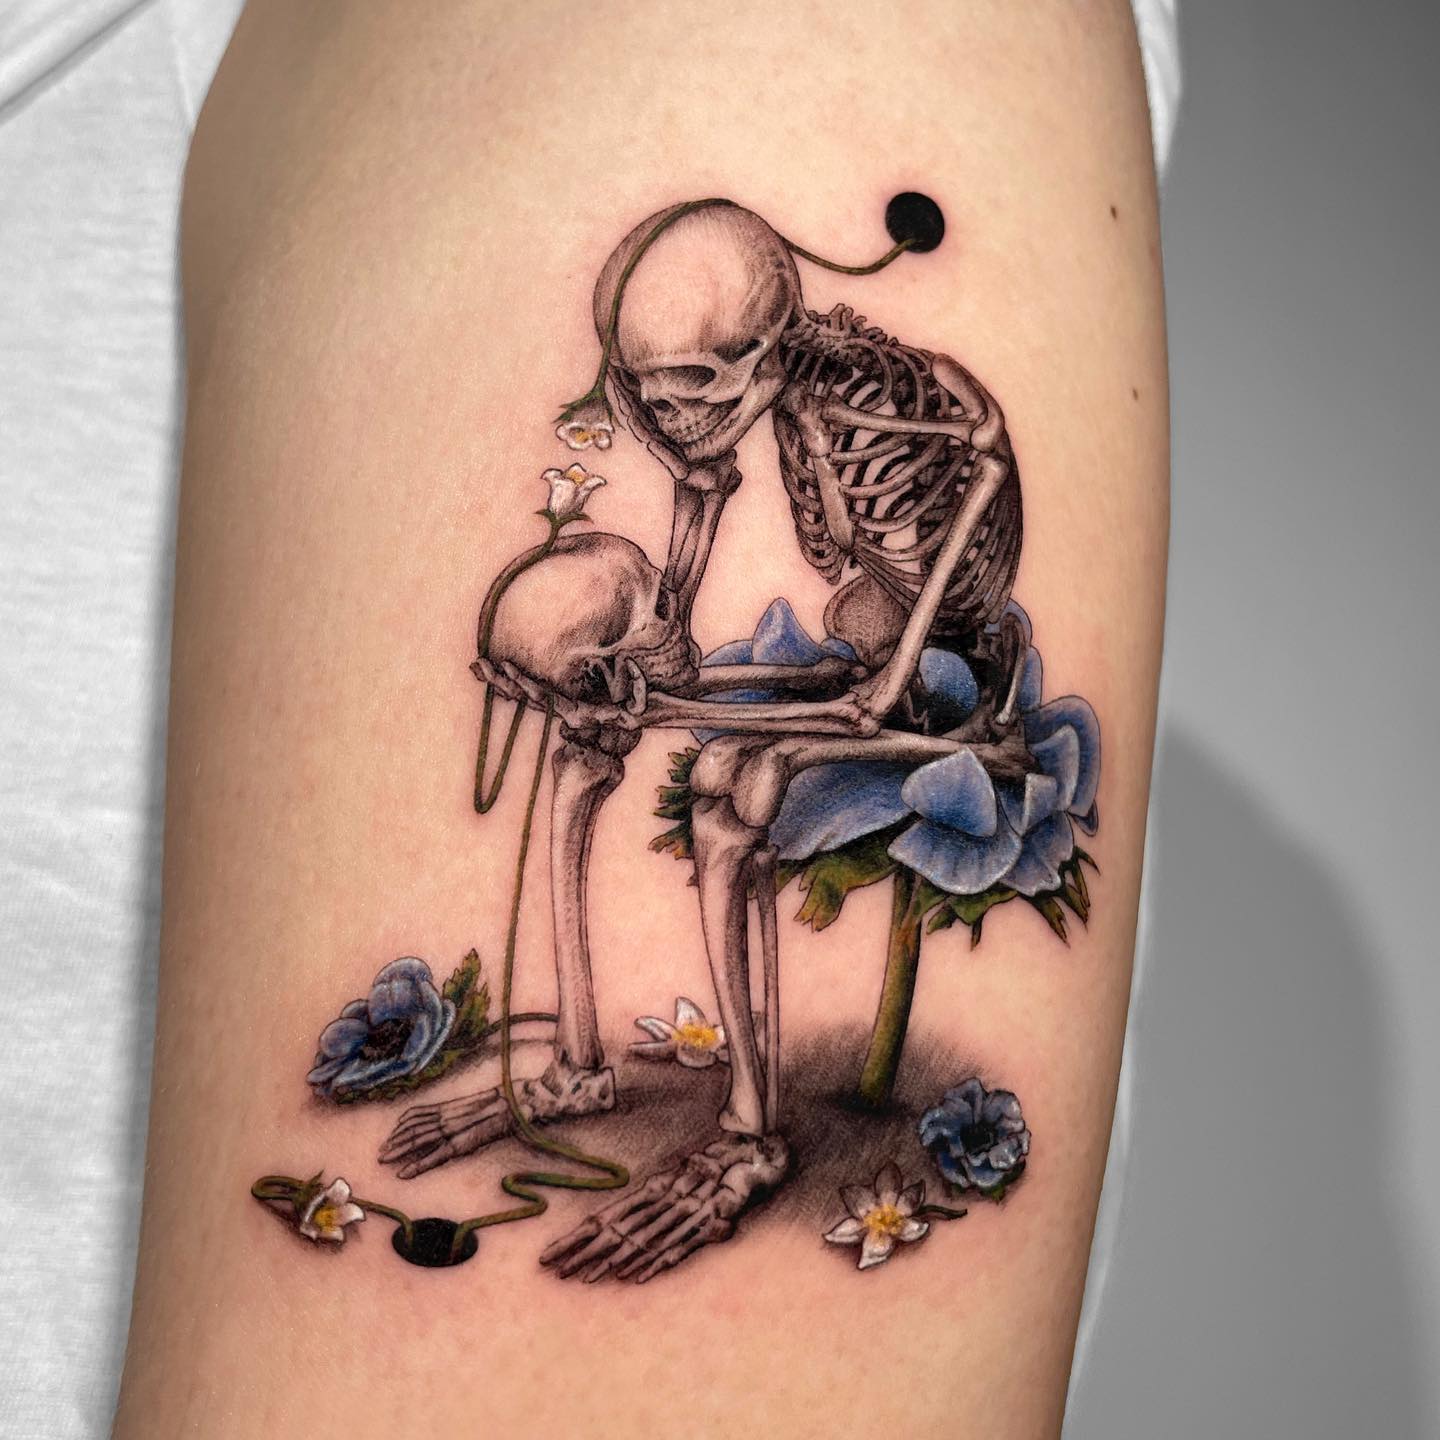 11 Simple Skeleton Tattoo Ideas That Will Blow Your Mind  alexie